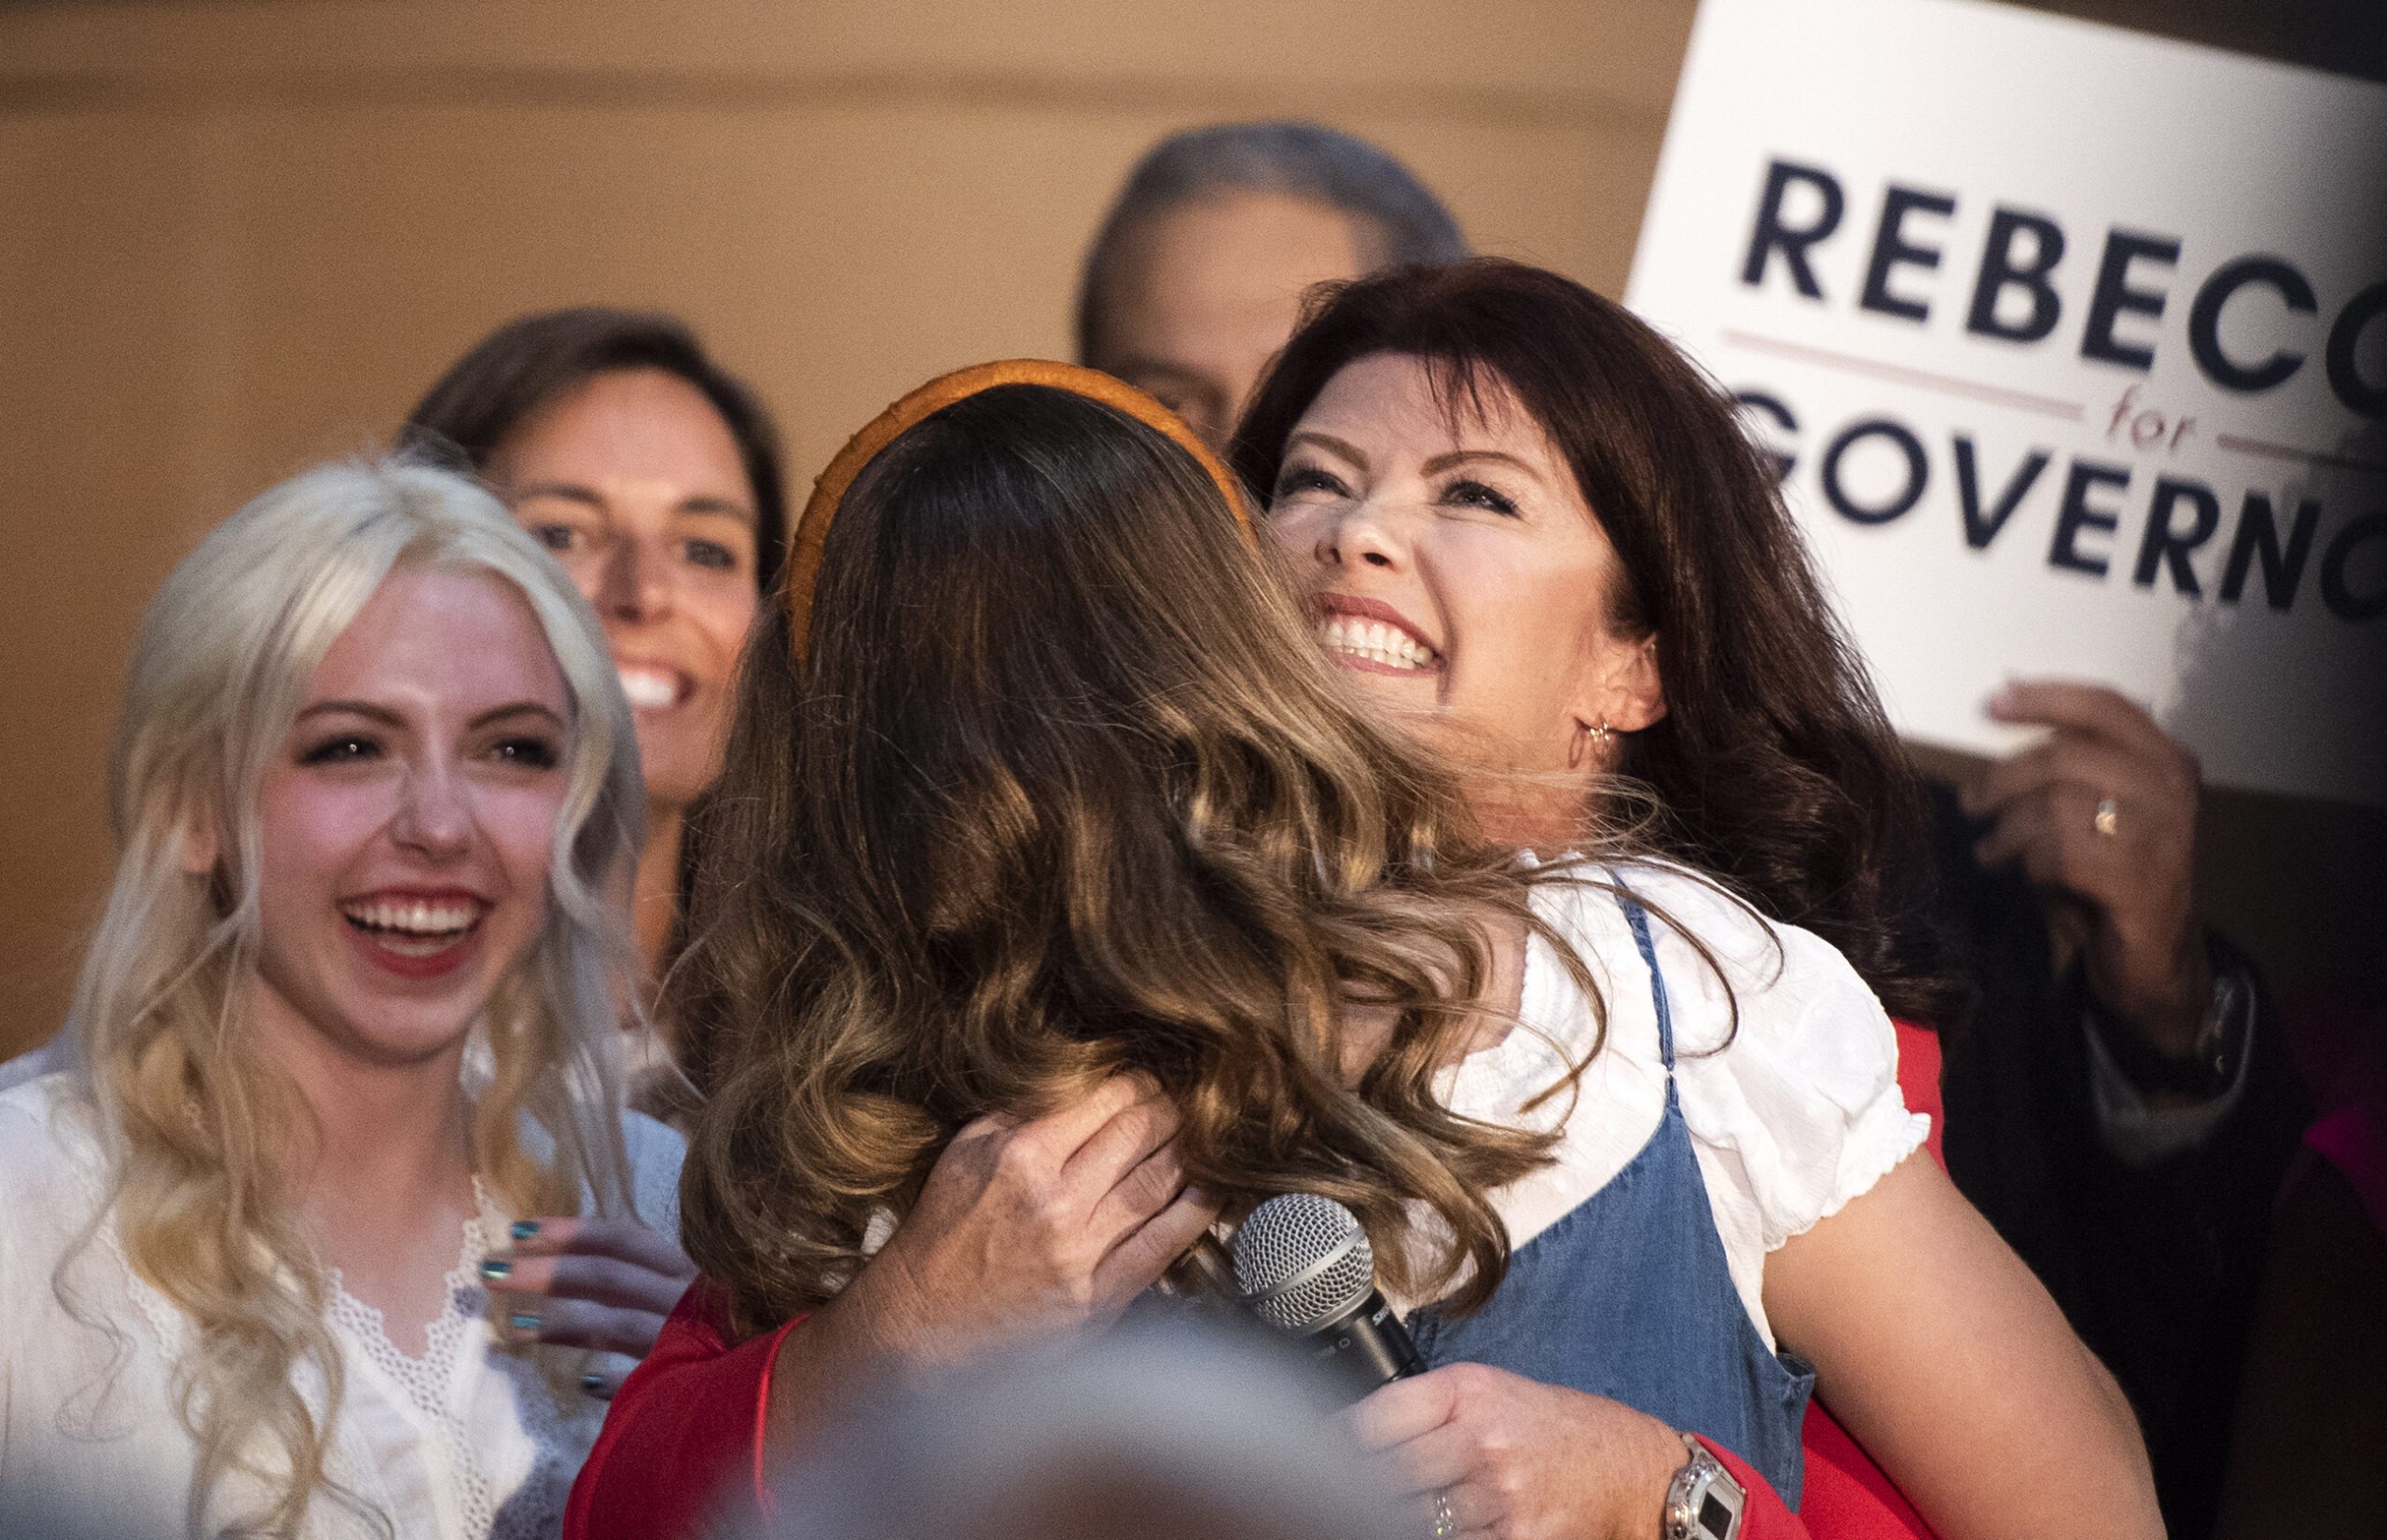 Rebecca Kleefisch has campaigned on her record in the Walker administration. Will it be enough?